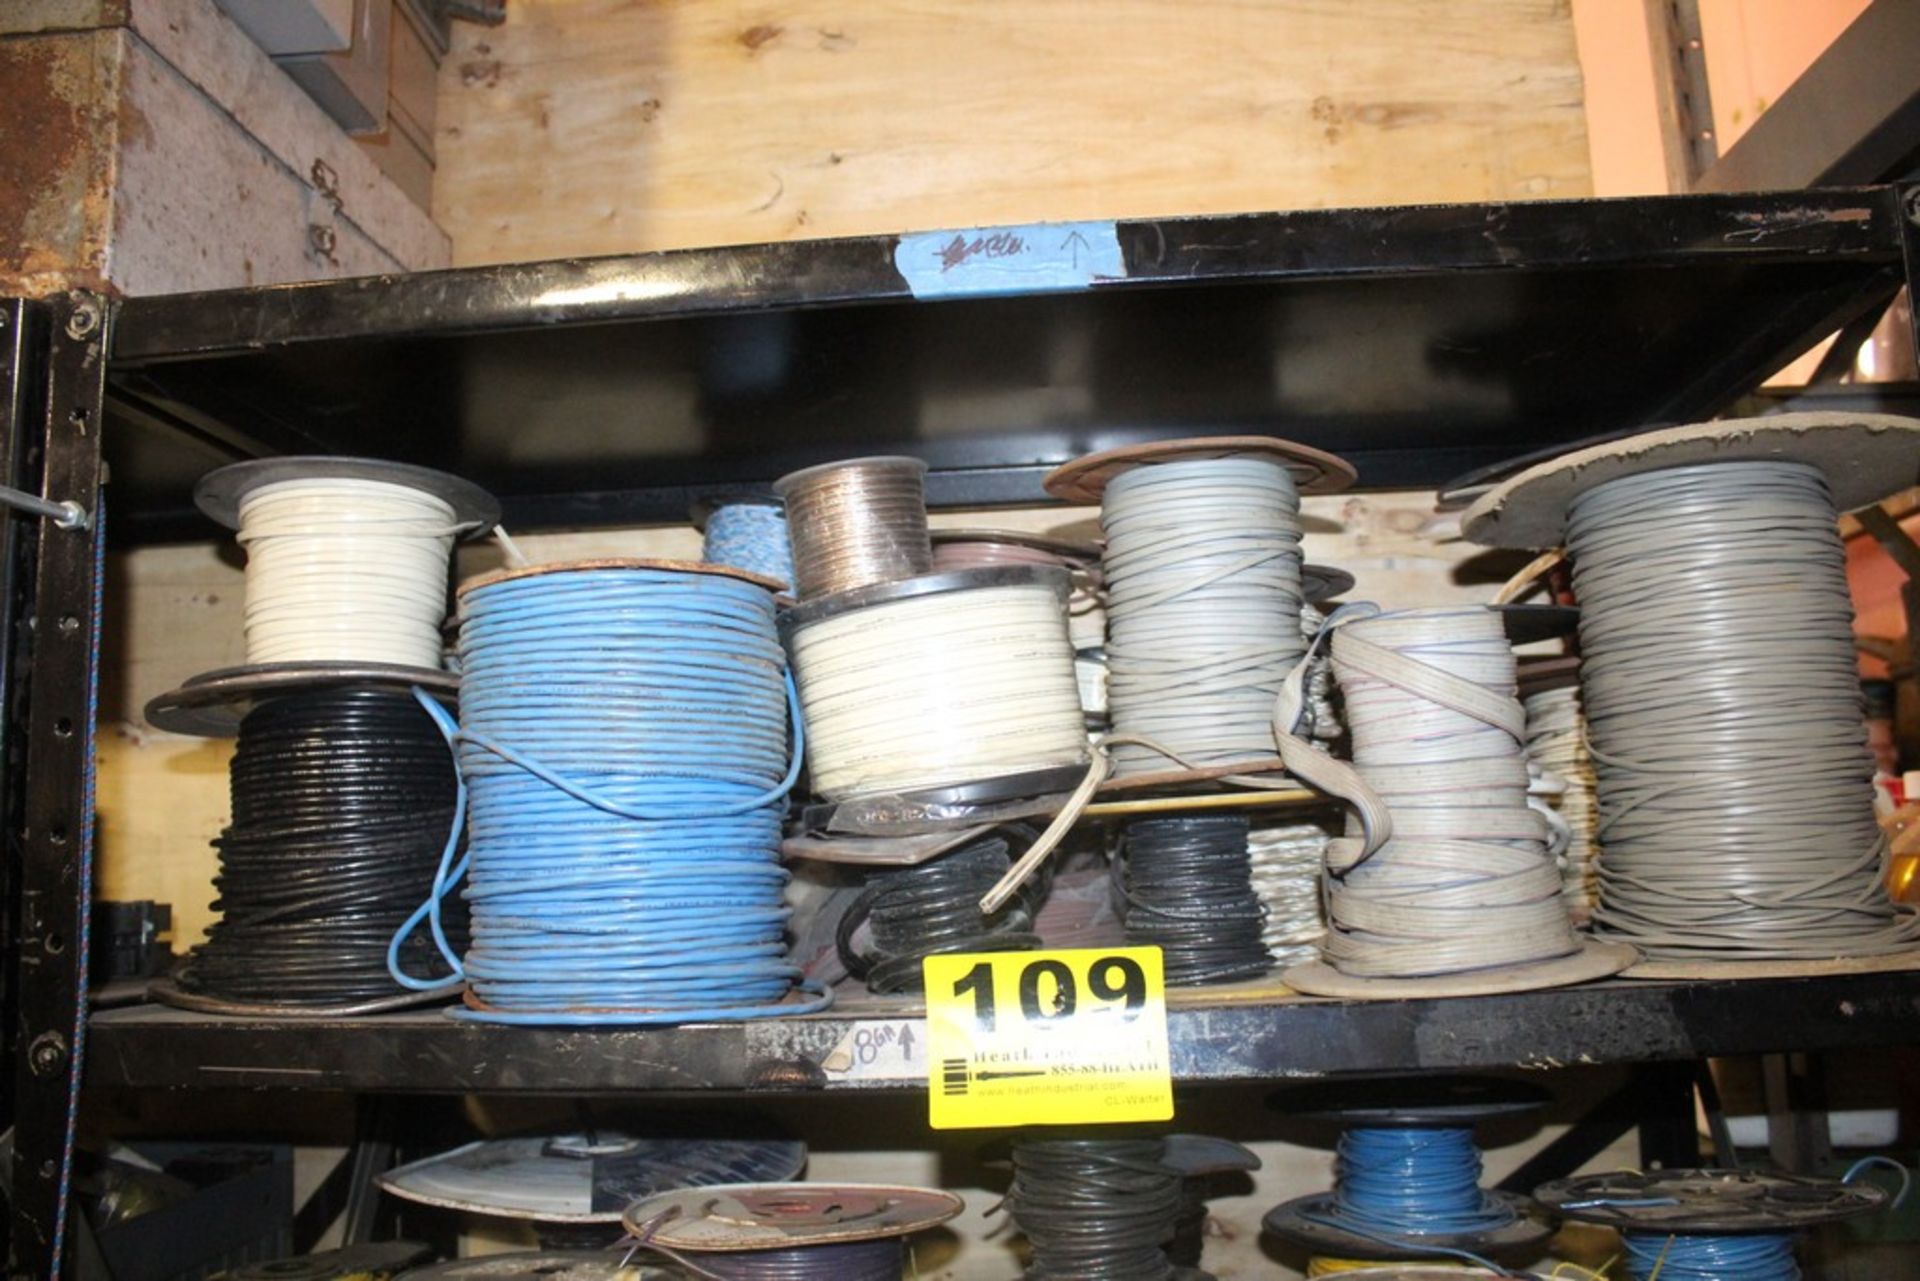 ASSORTED WIRE & COMMUNICATION CABLES ON SHELF